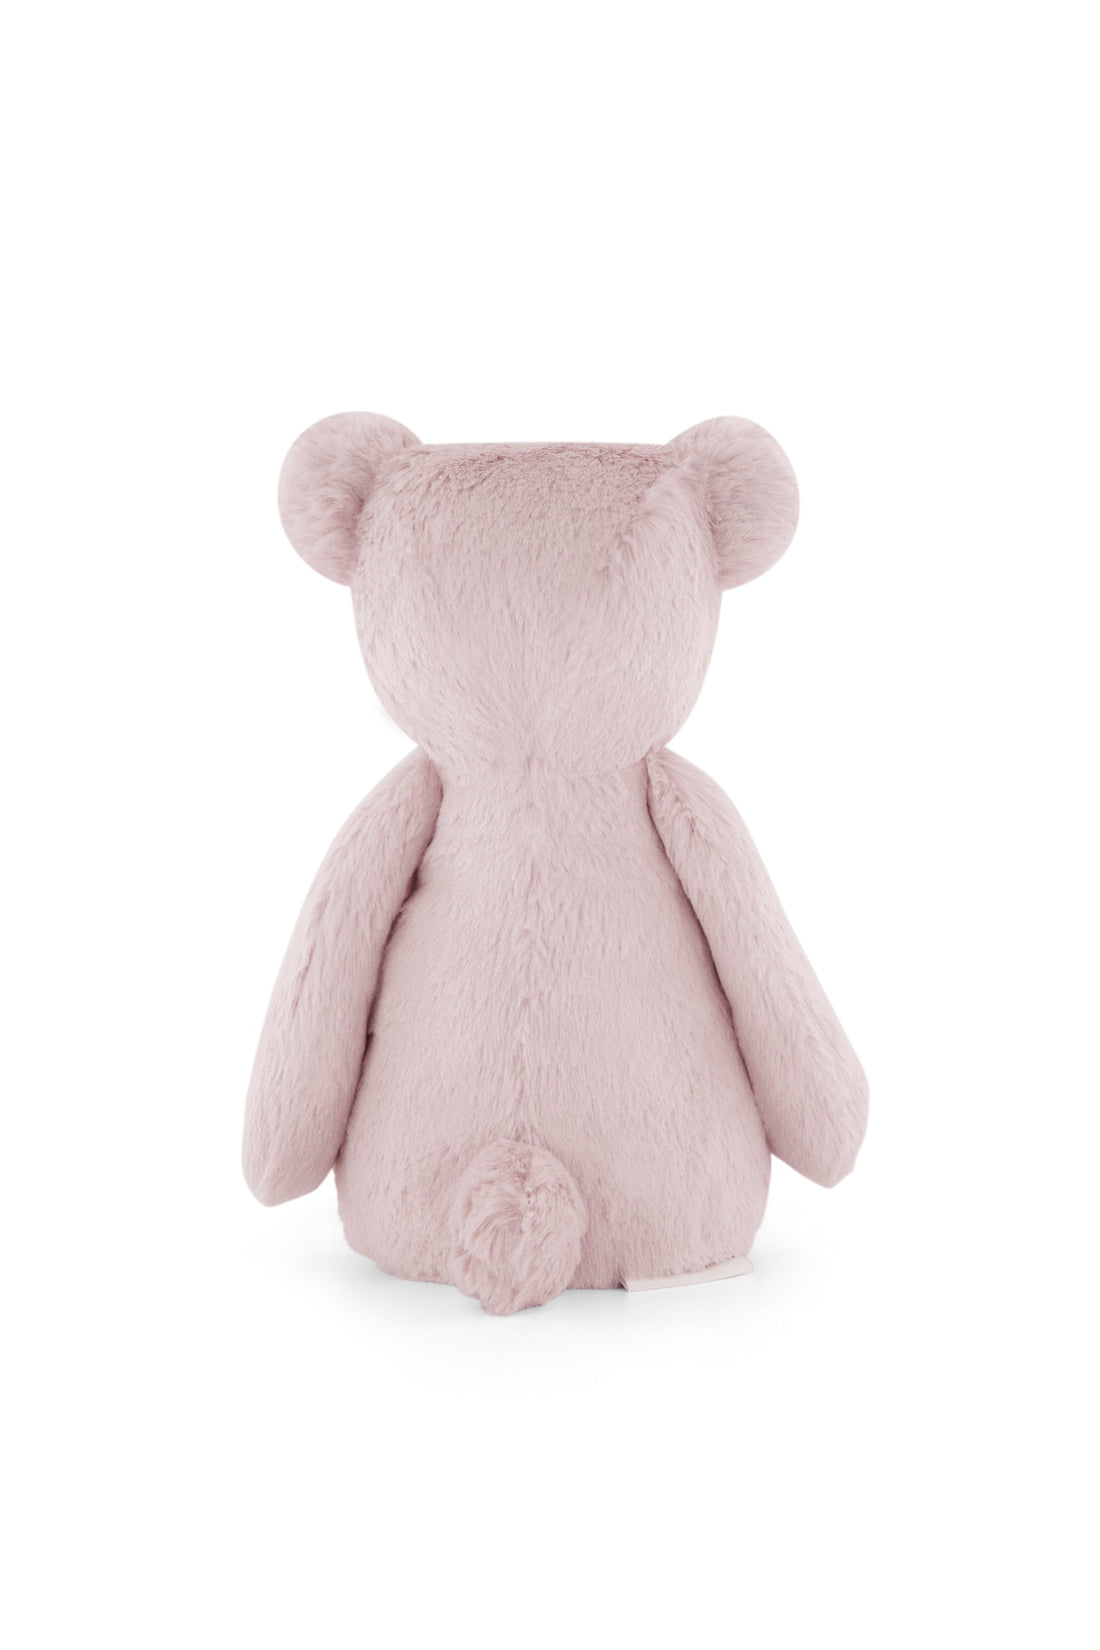 Snuggle Bunnies - George the Bear - Blossom Childrens Toy from Jamie Kay NZ